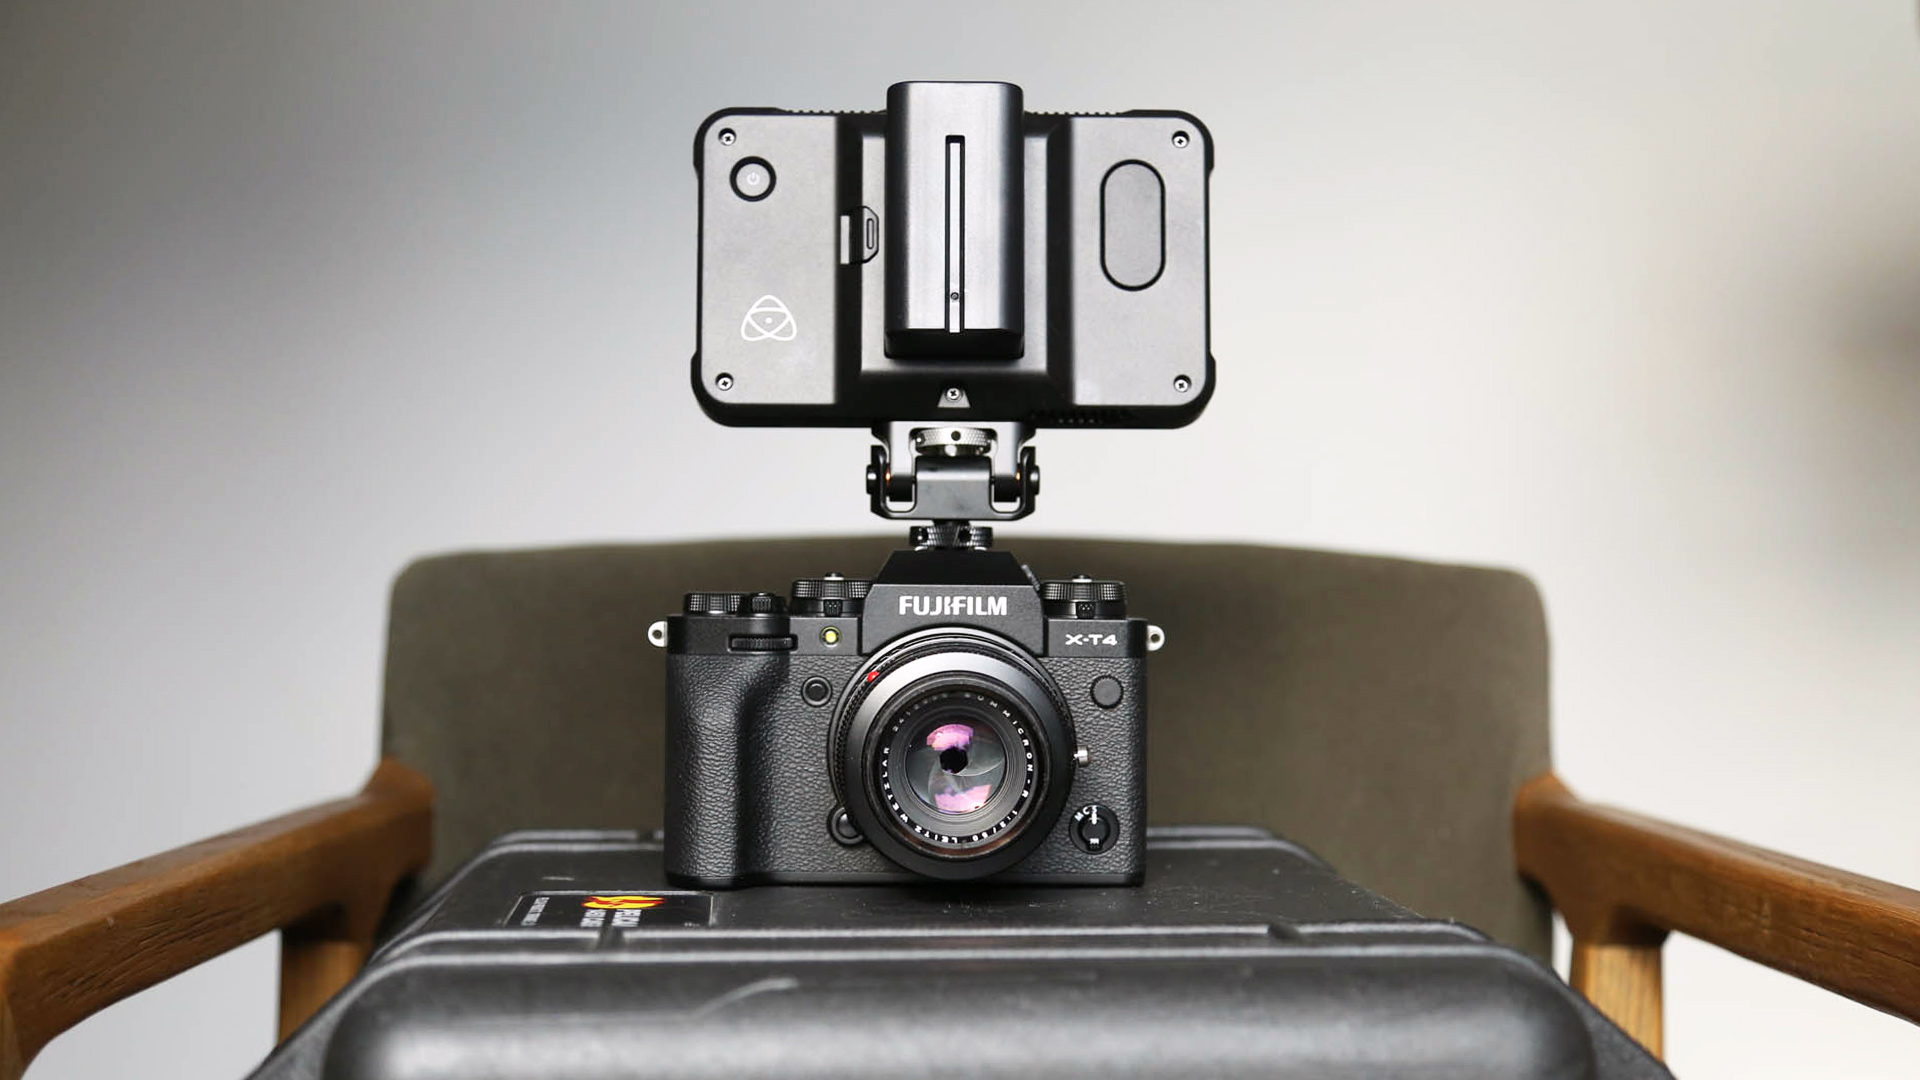 Afname Ananiver Implicaties Building A Fuji X-T4 Cinema Camera Rig With Leica Glass For Under $500 -  Noam Kroll